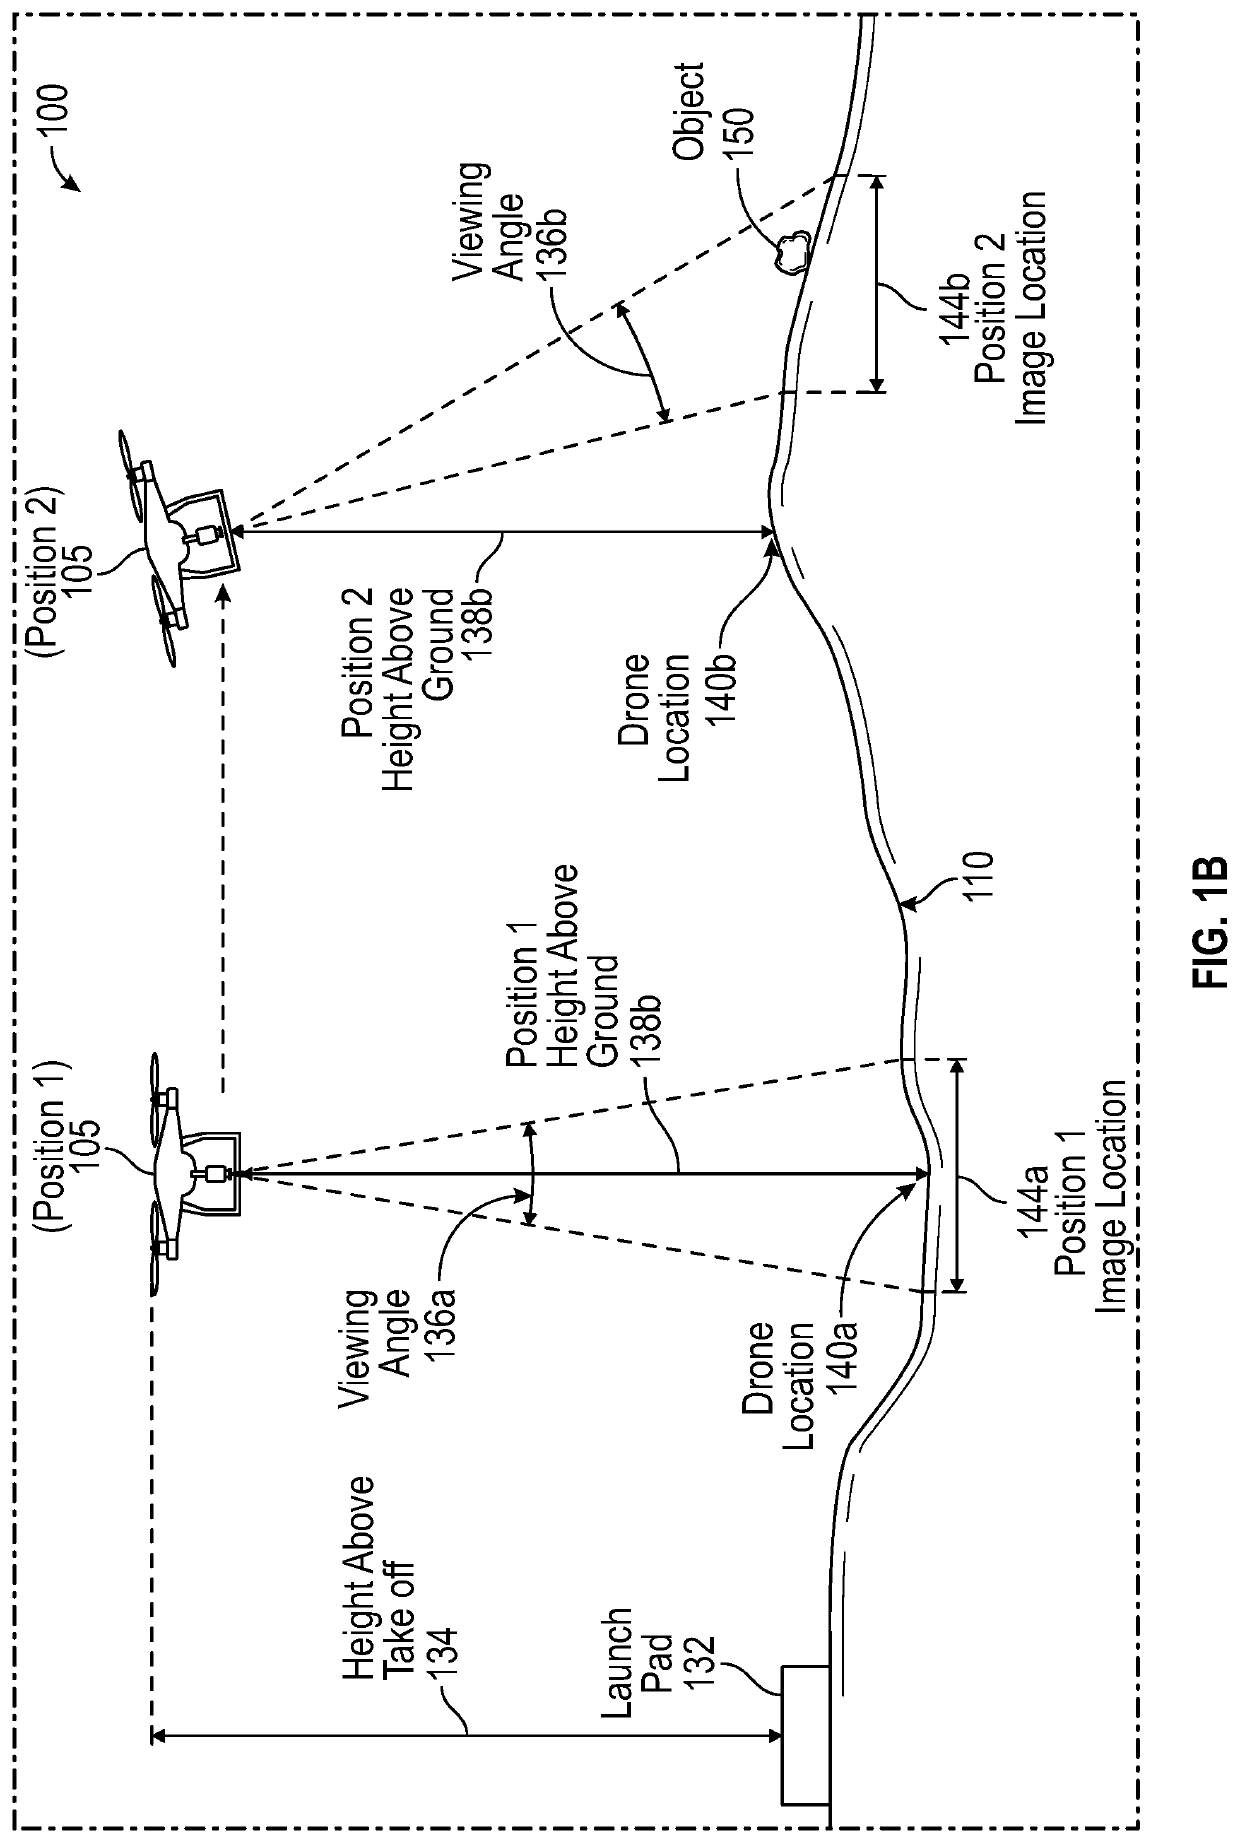 Object collection system and method